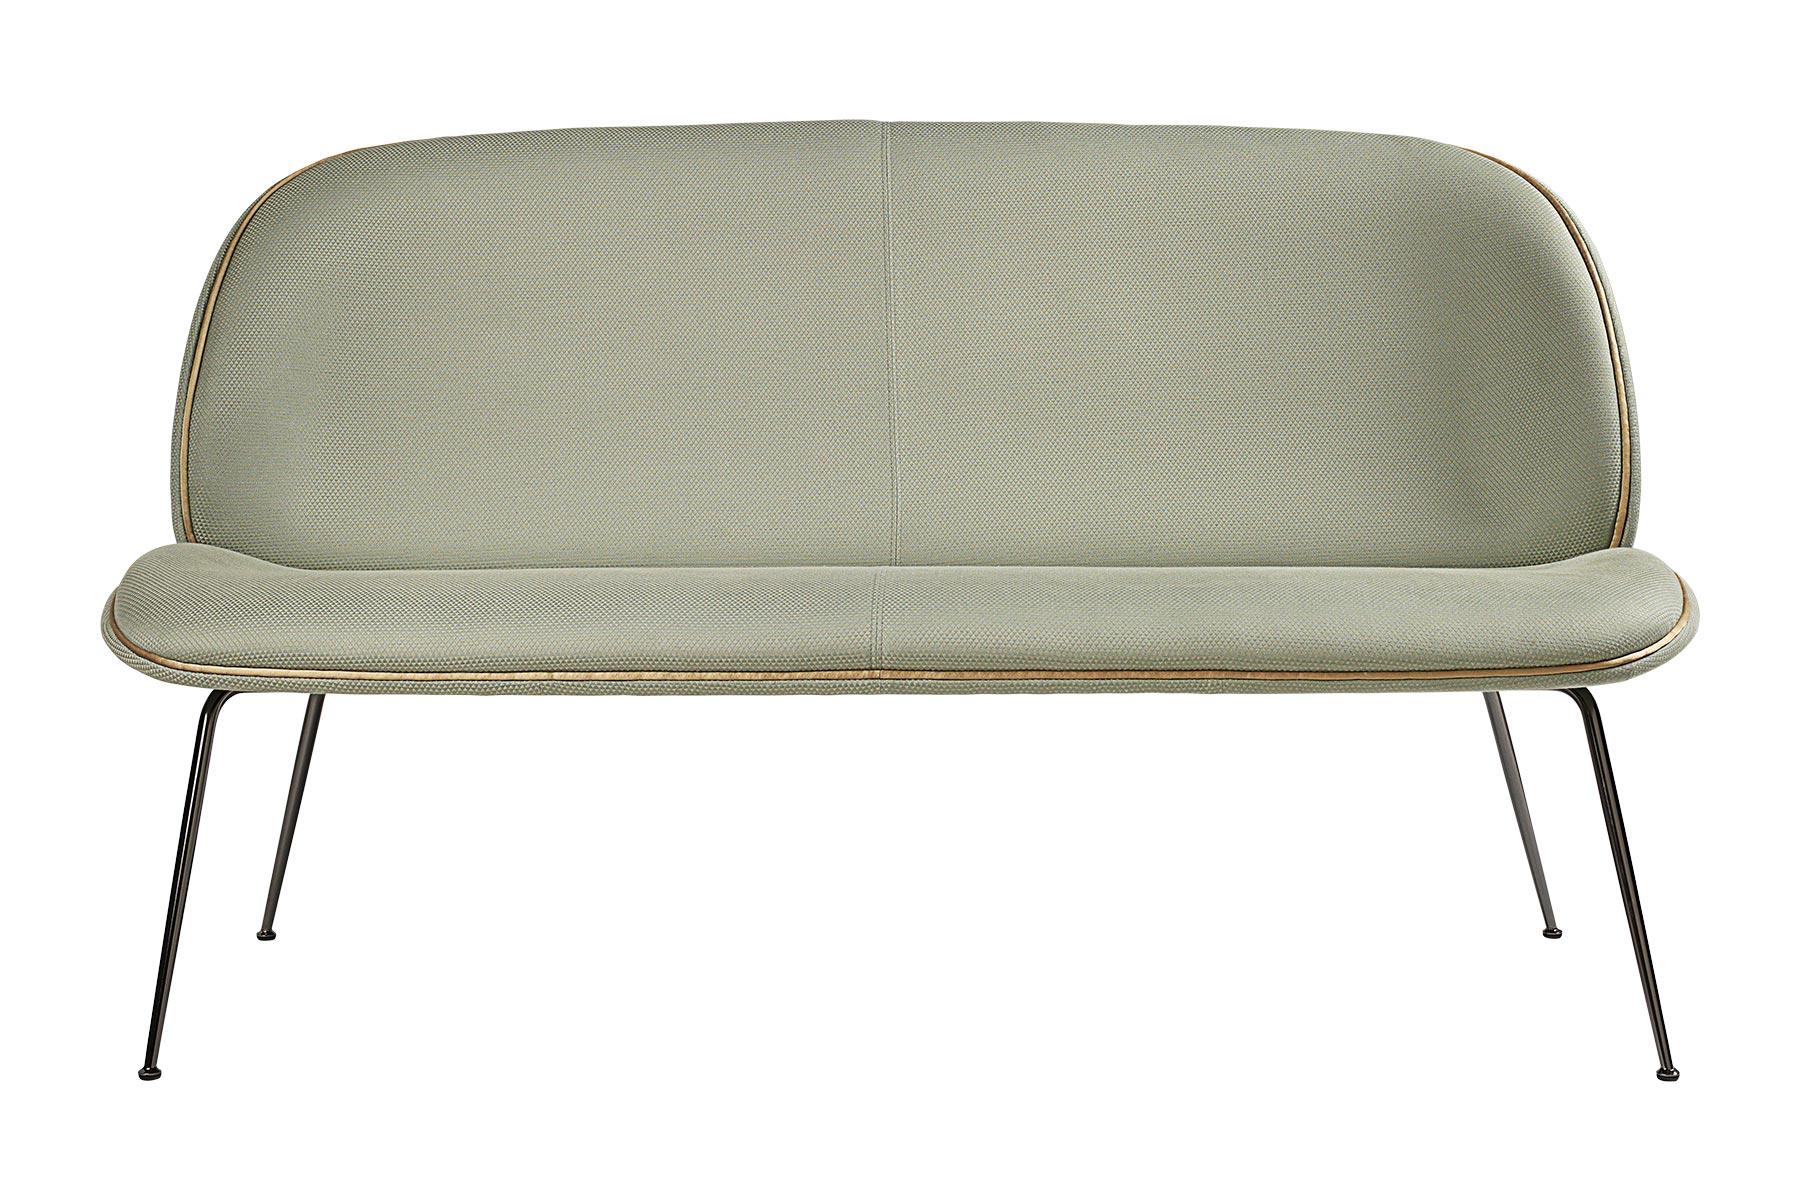 Beetle Sofa, Conic Base, Fully Upholstered with Semi-Matte Brass Legs In Excellent Condition For Sale In Berkeley, CA